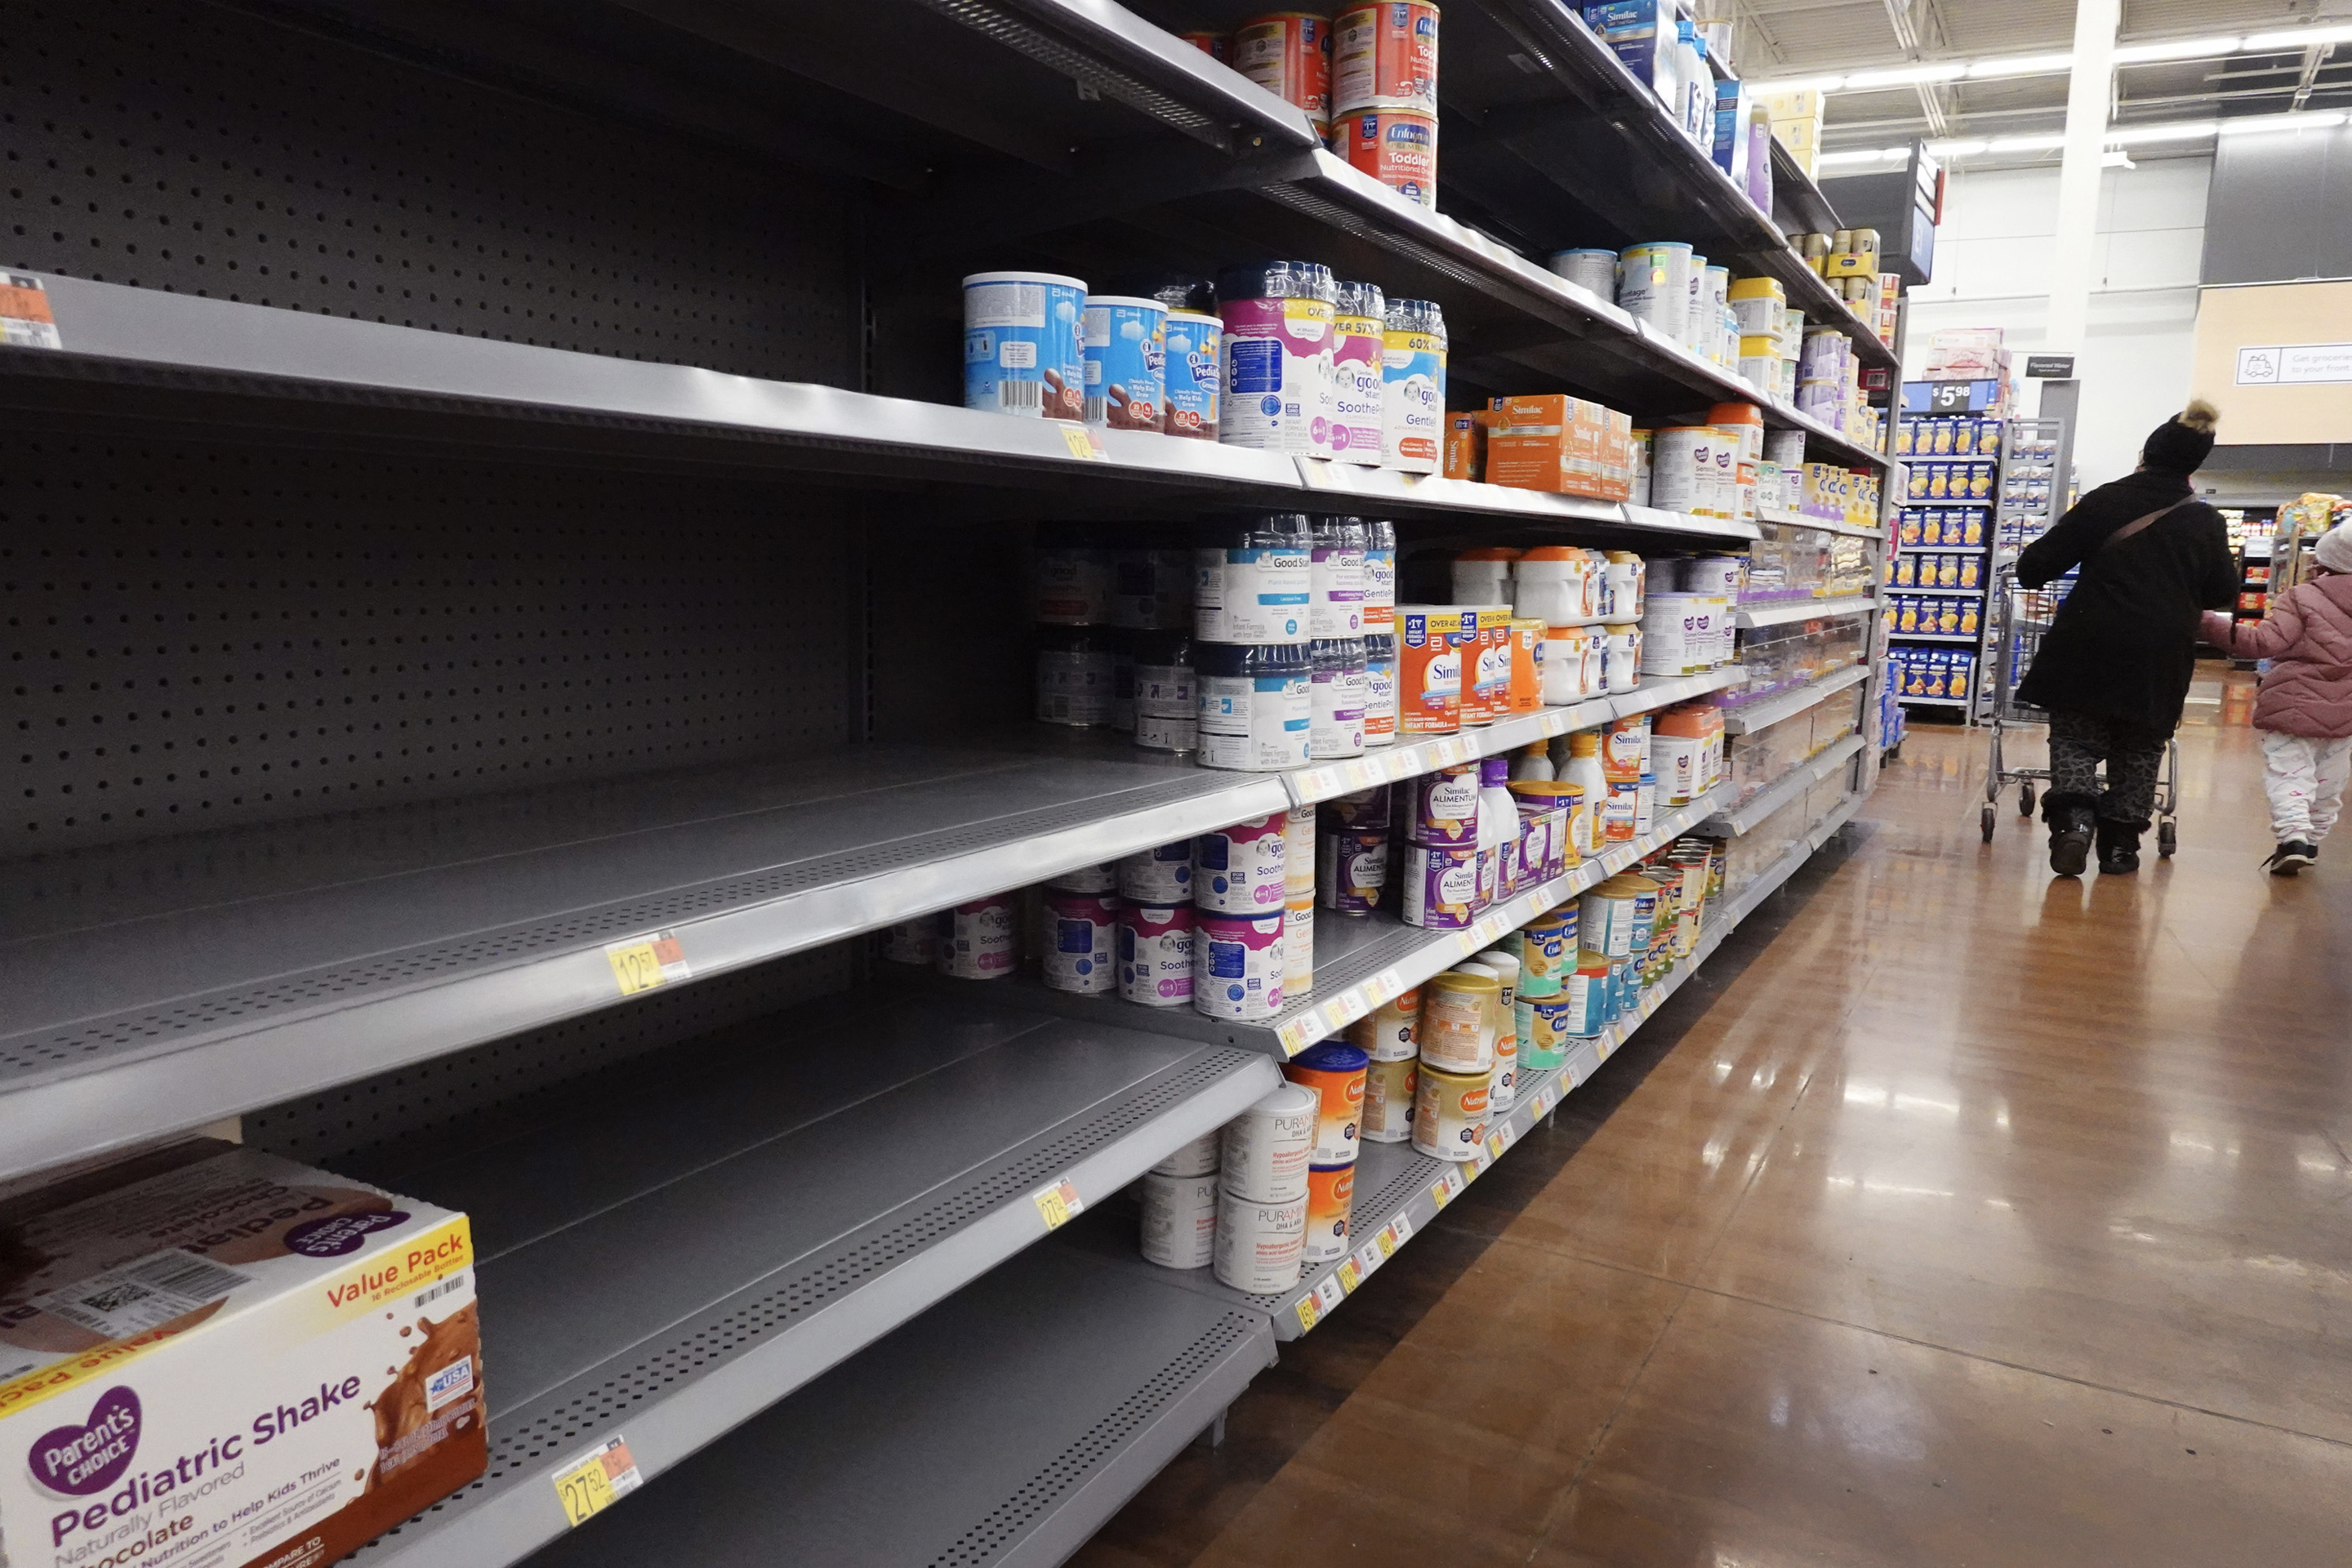 Baby Formula Shortage: Why Target, Walgreens, Walmart and Other Stores Are Restricting Purchases